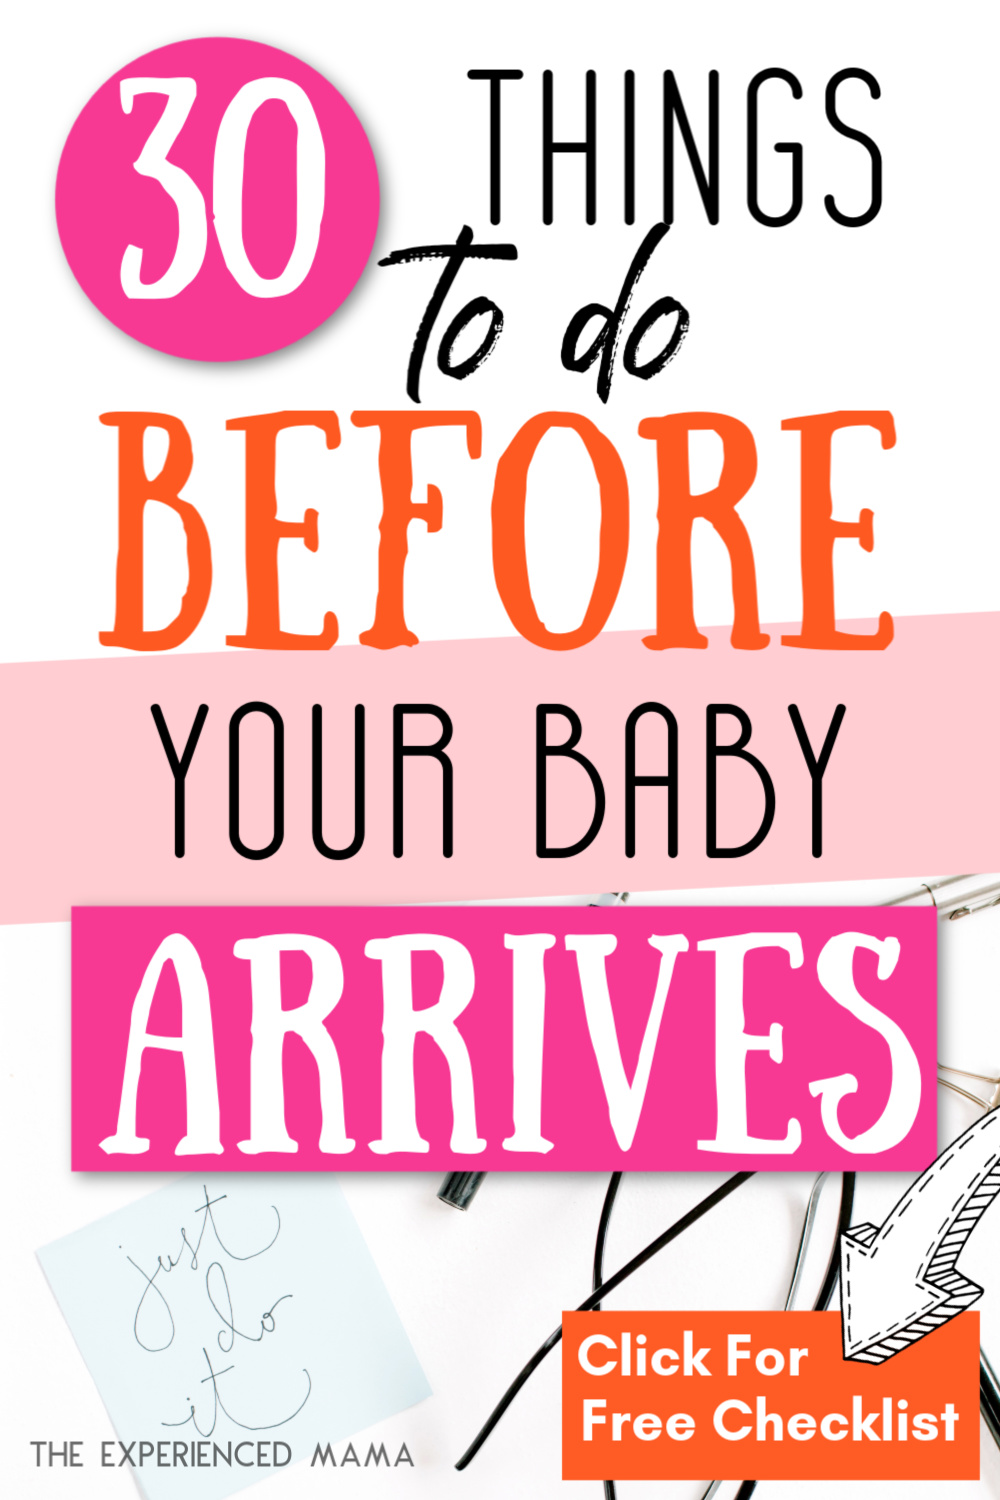 post it note with text overlay, "30 things to do before your baby arrives"